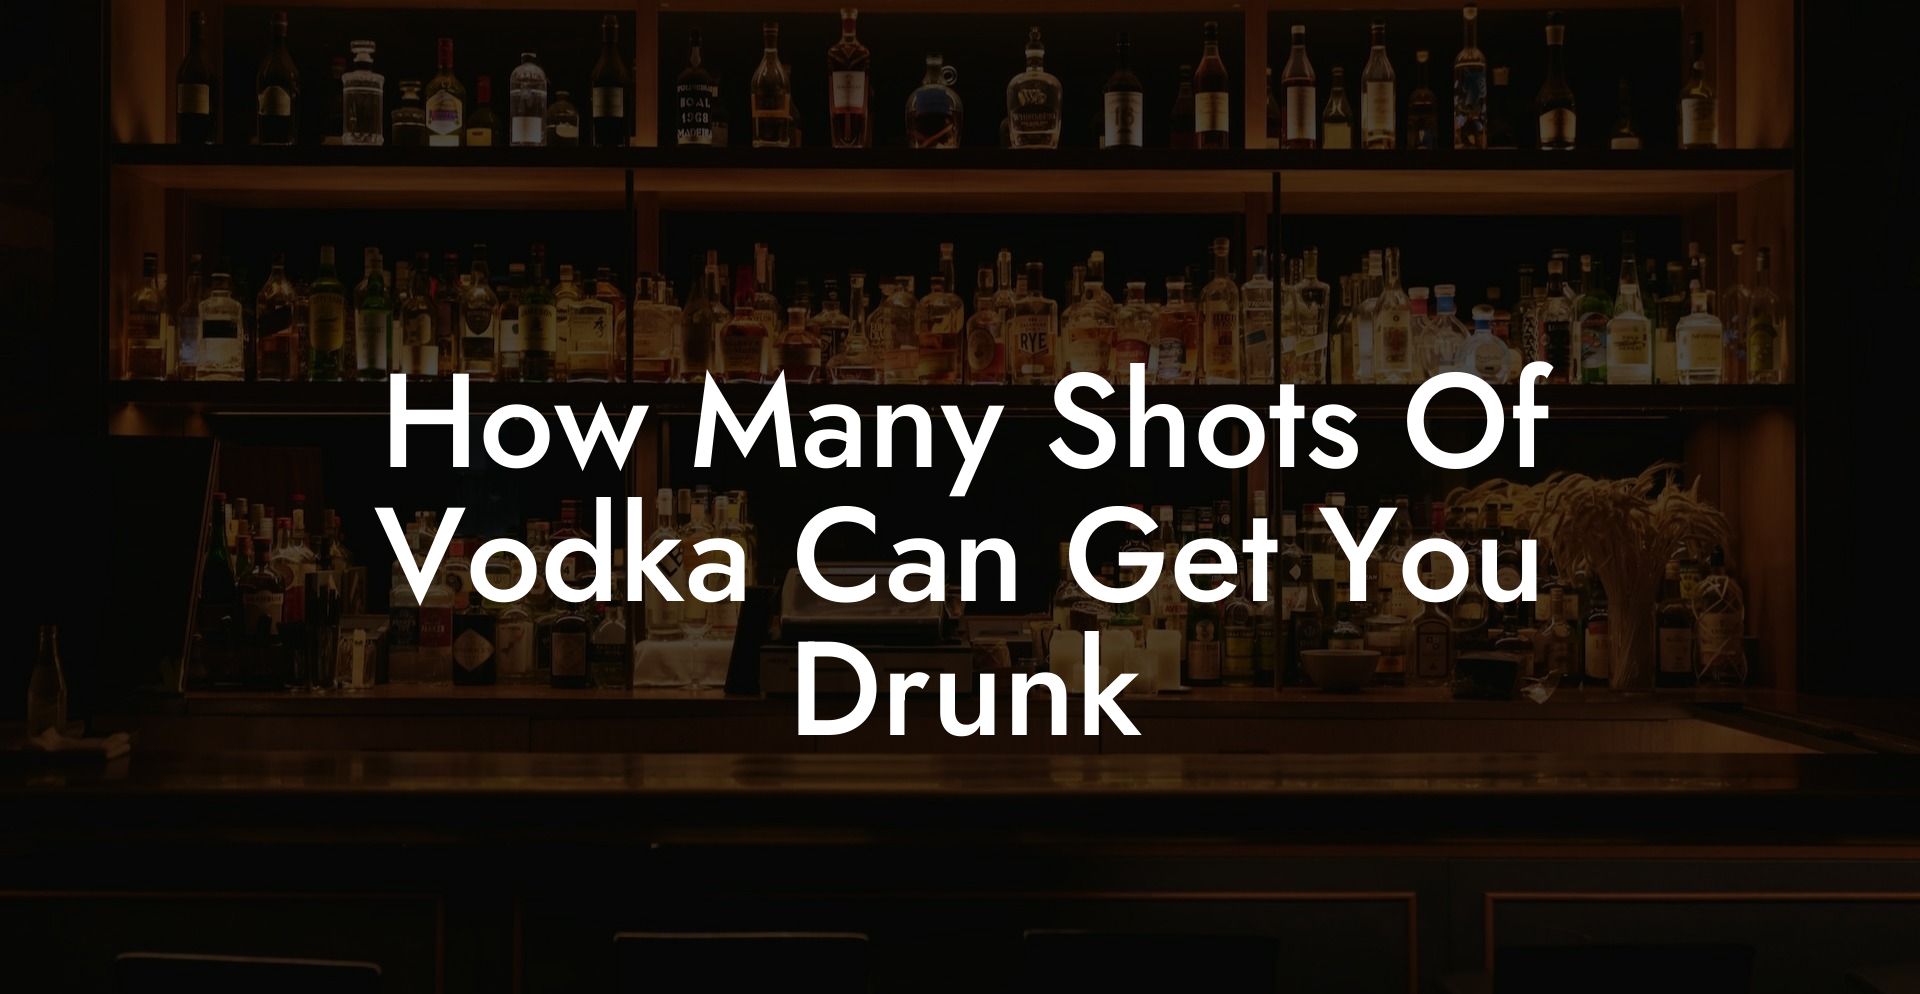 How Many Shots Of Vodka Can Get You Drunk